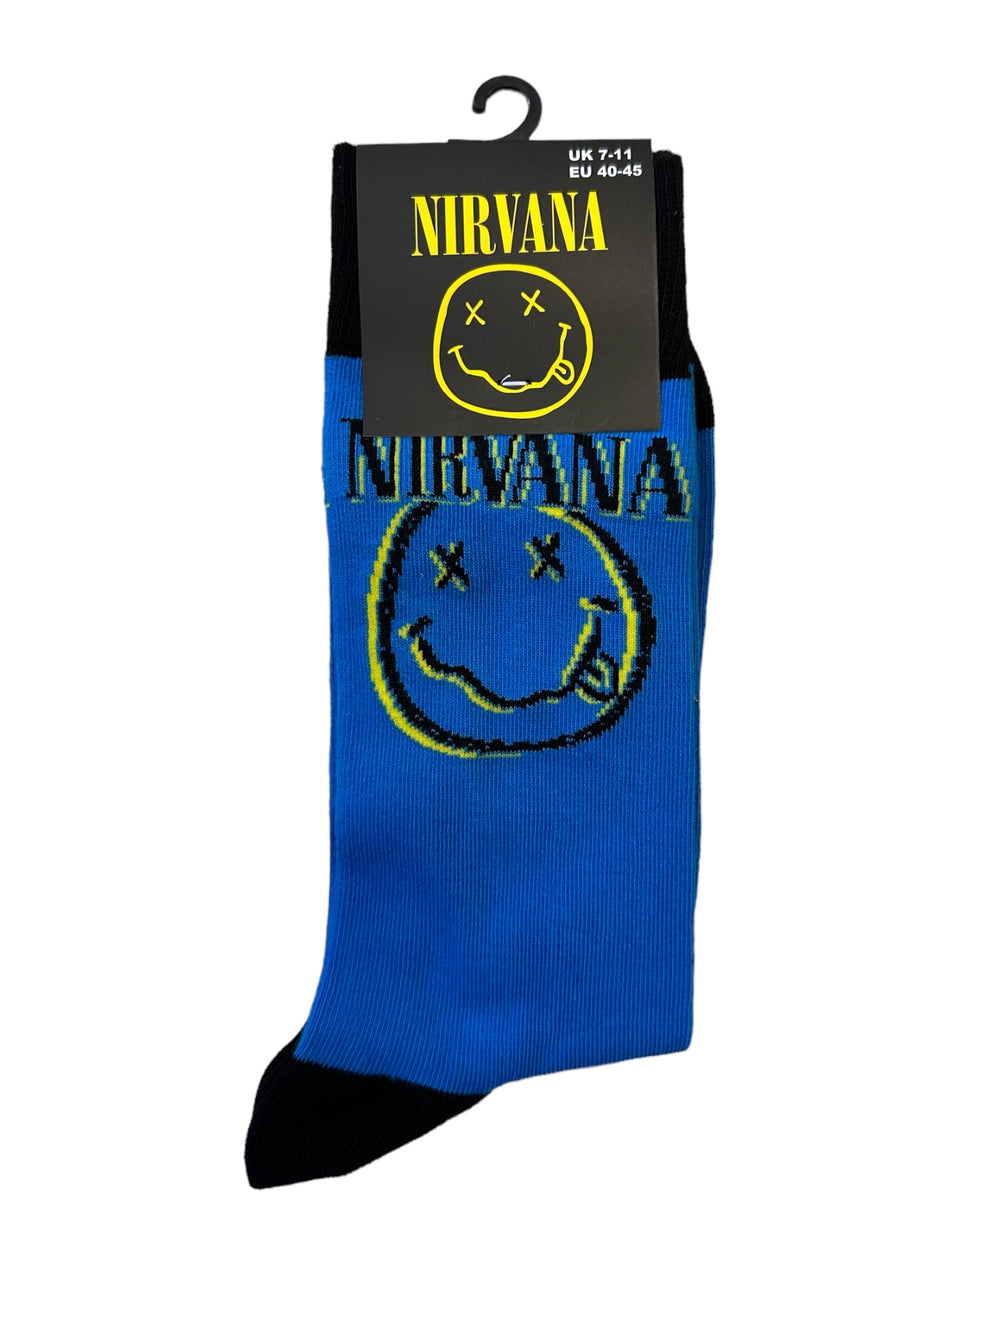 Nirvana Inverse Smiley Uni BLUE Official Product 1 Pair Jacquard Socks Brand New